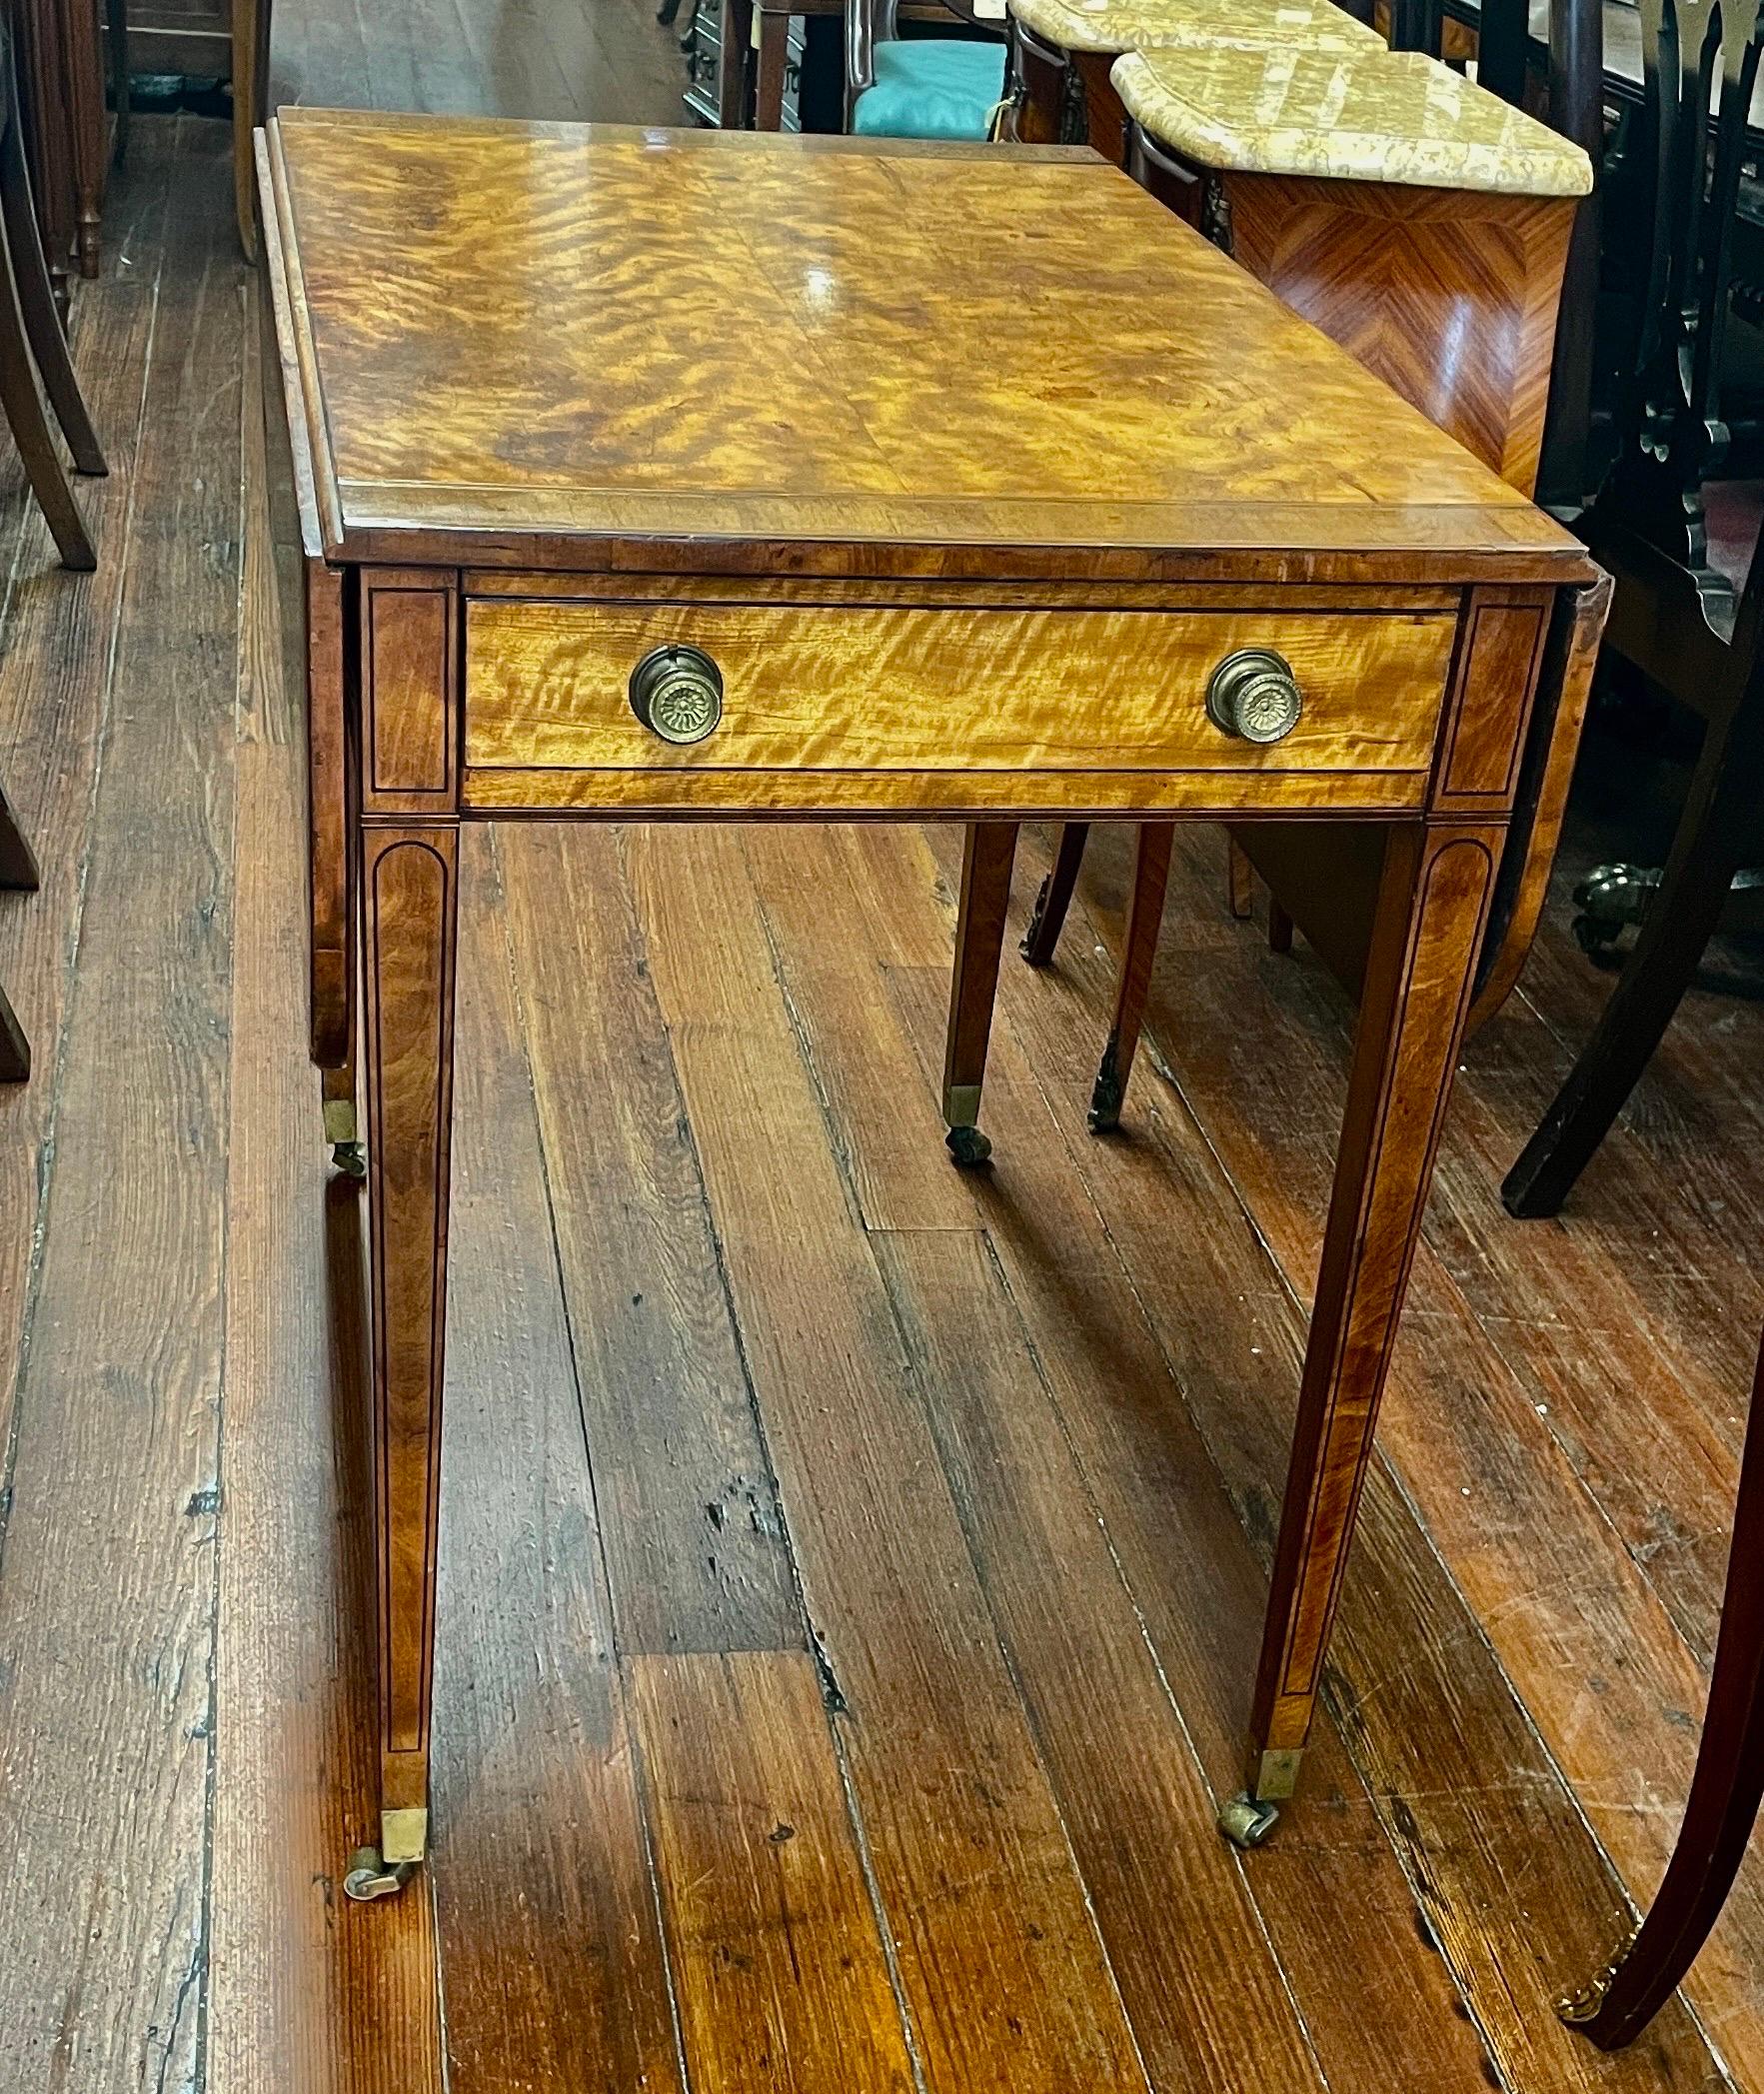 A true rarity, a marvelous Antique English Regency period Geo. III Rosewood inlaid Satinwood Drop-Leaf Pembroke Table with what appears to be cedar lined drawer; original chased ormolu brass round knobs front of drawer and faux backside. In the